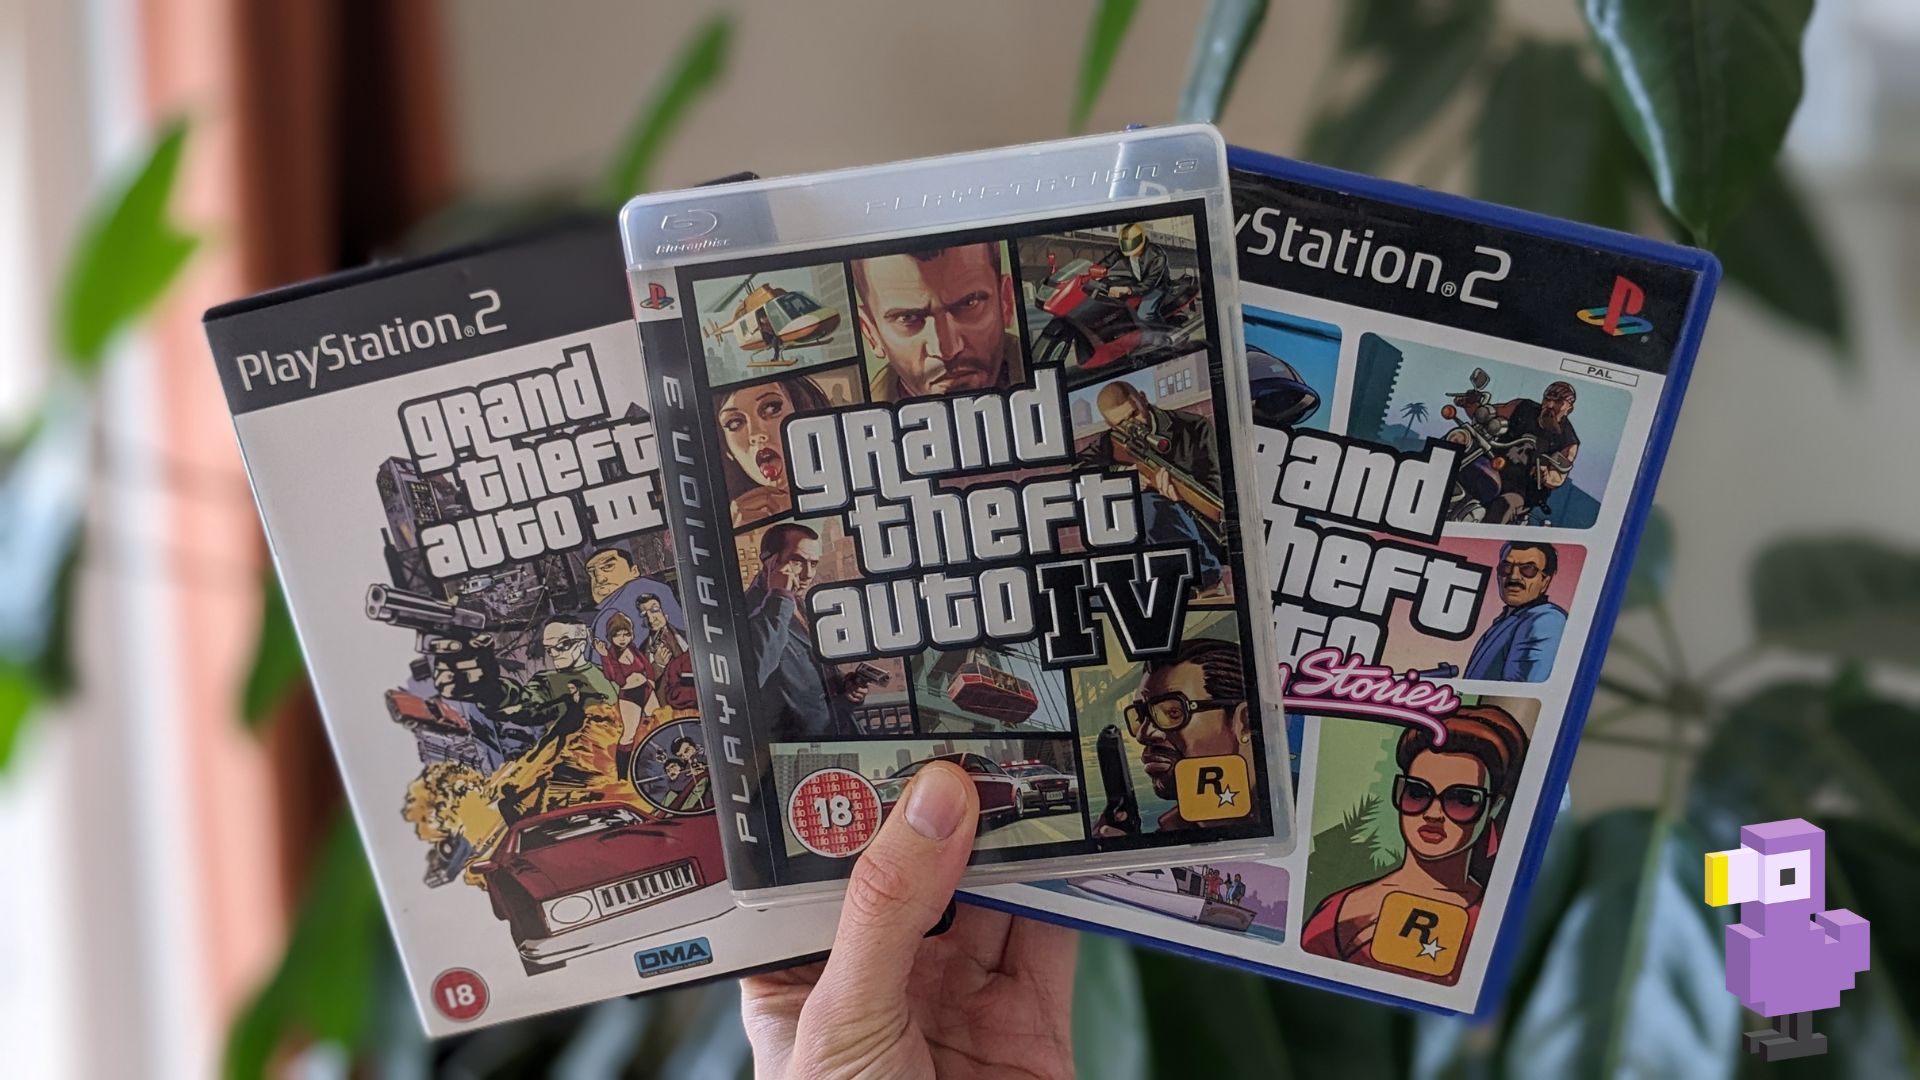 GTA VI on The PS5: 10 Places We Would Love to Visit - PS5